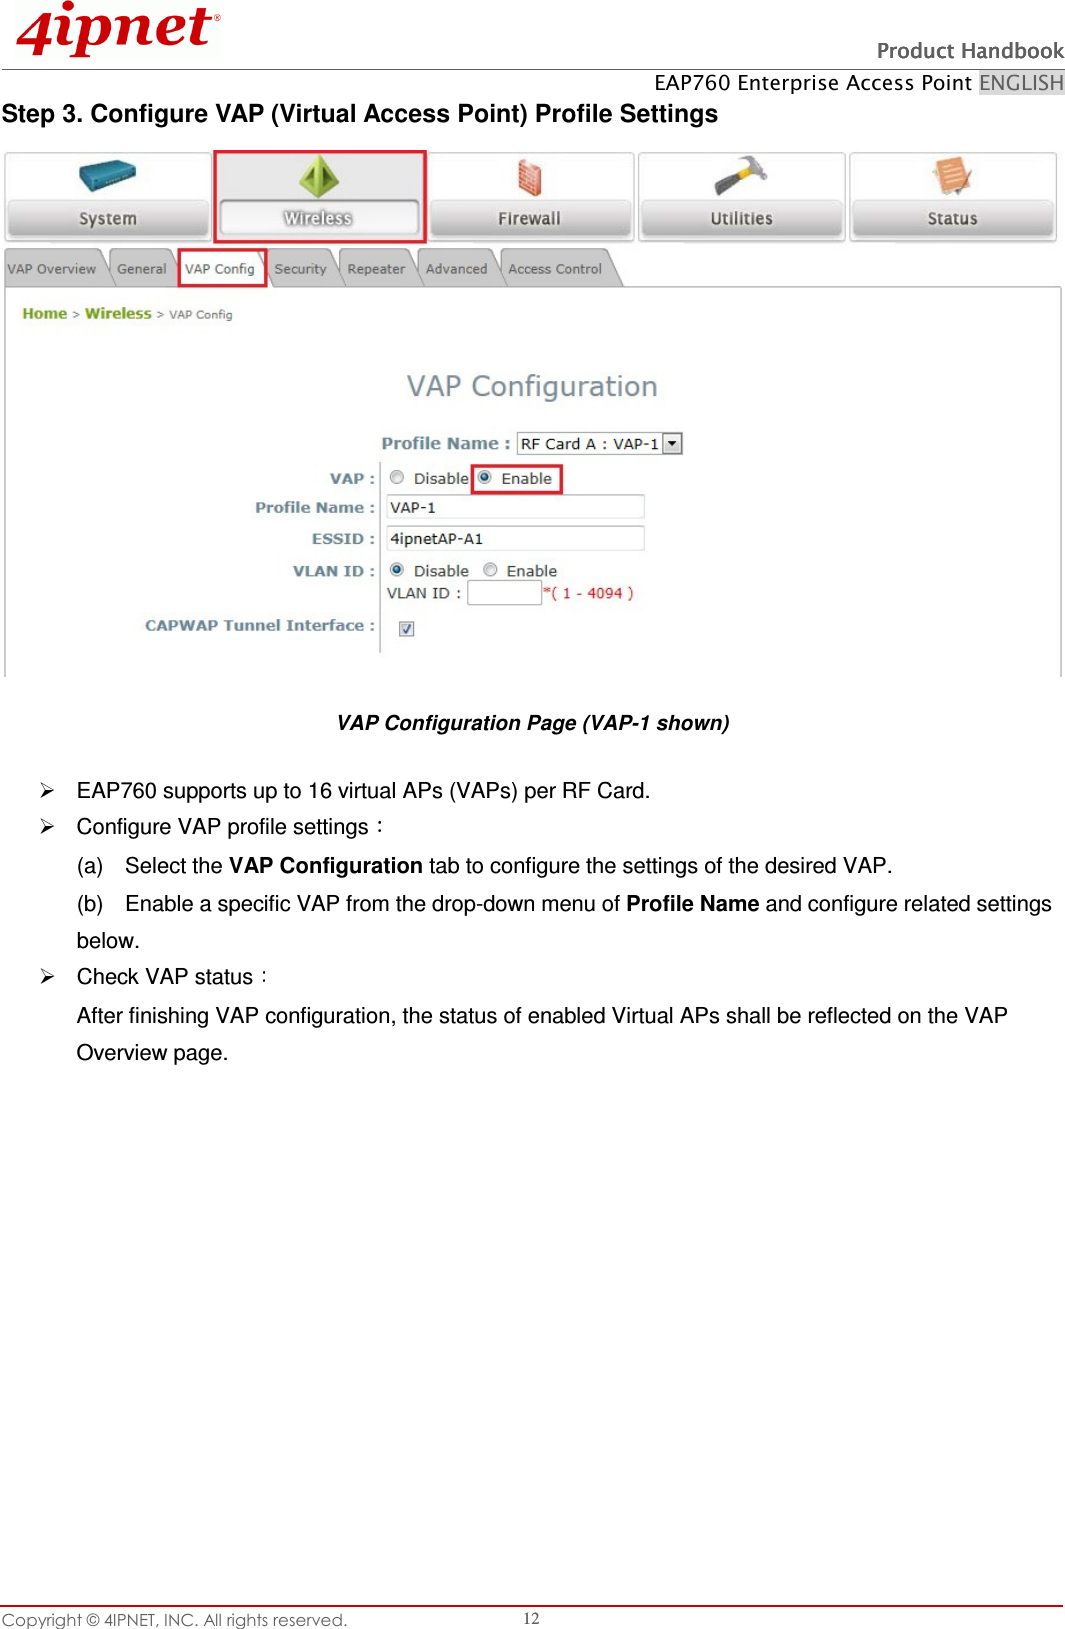   Product HandbookProduct HandbookProduct HandbookProduct Handbook    EAP760 Enterprise Access Point ENGLISH Copyright © 4IPNET, INC. All rights reserved.    12 Step 3. Configure VAP (Virtual Access Point) Profile Settings  VAP Configuration Page (VAP-1 shown)   EAP760 supports up to 16 virtual APs (VAPs) per RF Card.     Configure VAP profile settings  (a)    Select the VAP Configuration tab to configure the settings of the desired VAP.   (b)    Enable a specific VAP from the drop-down menu of Profile Name and configure related settings below.   Check VAP status  After finishing VAP configuration, the status of enabled Virtual APs shall be reflected on the VAP Overview page.   